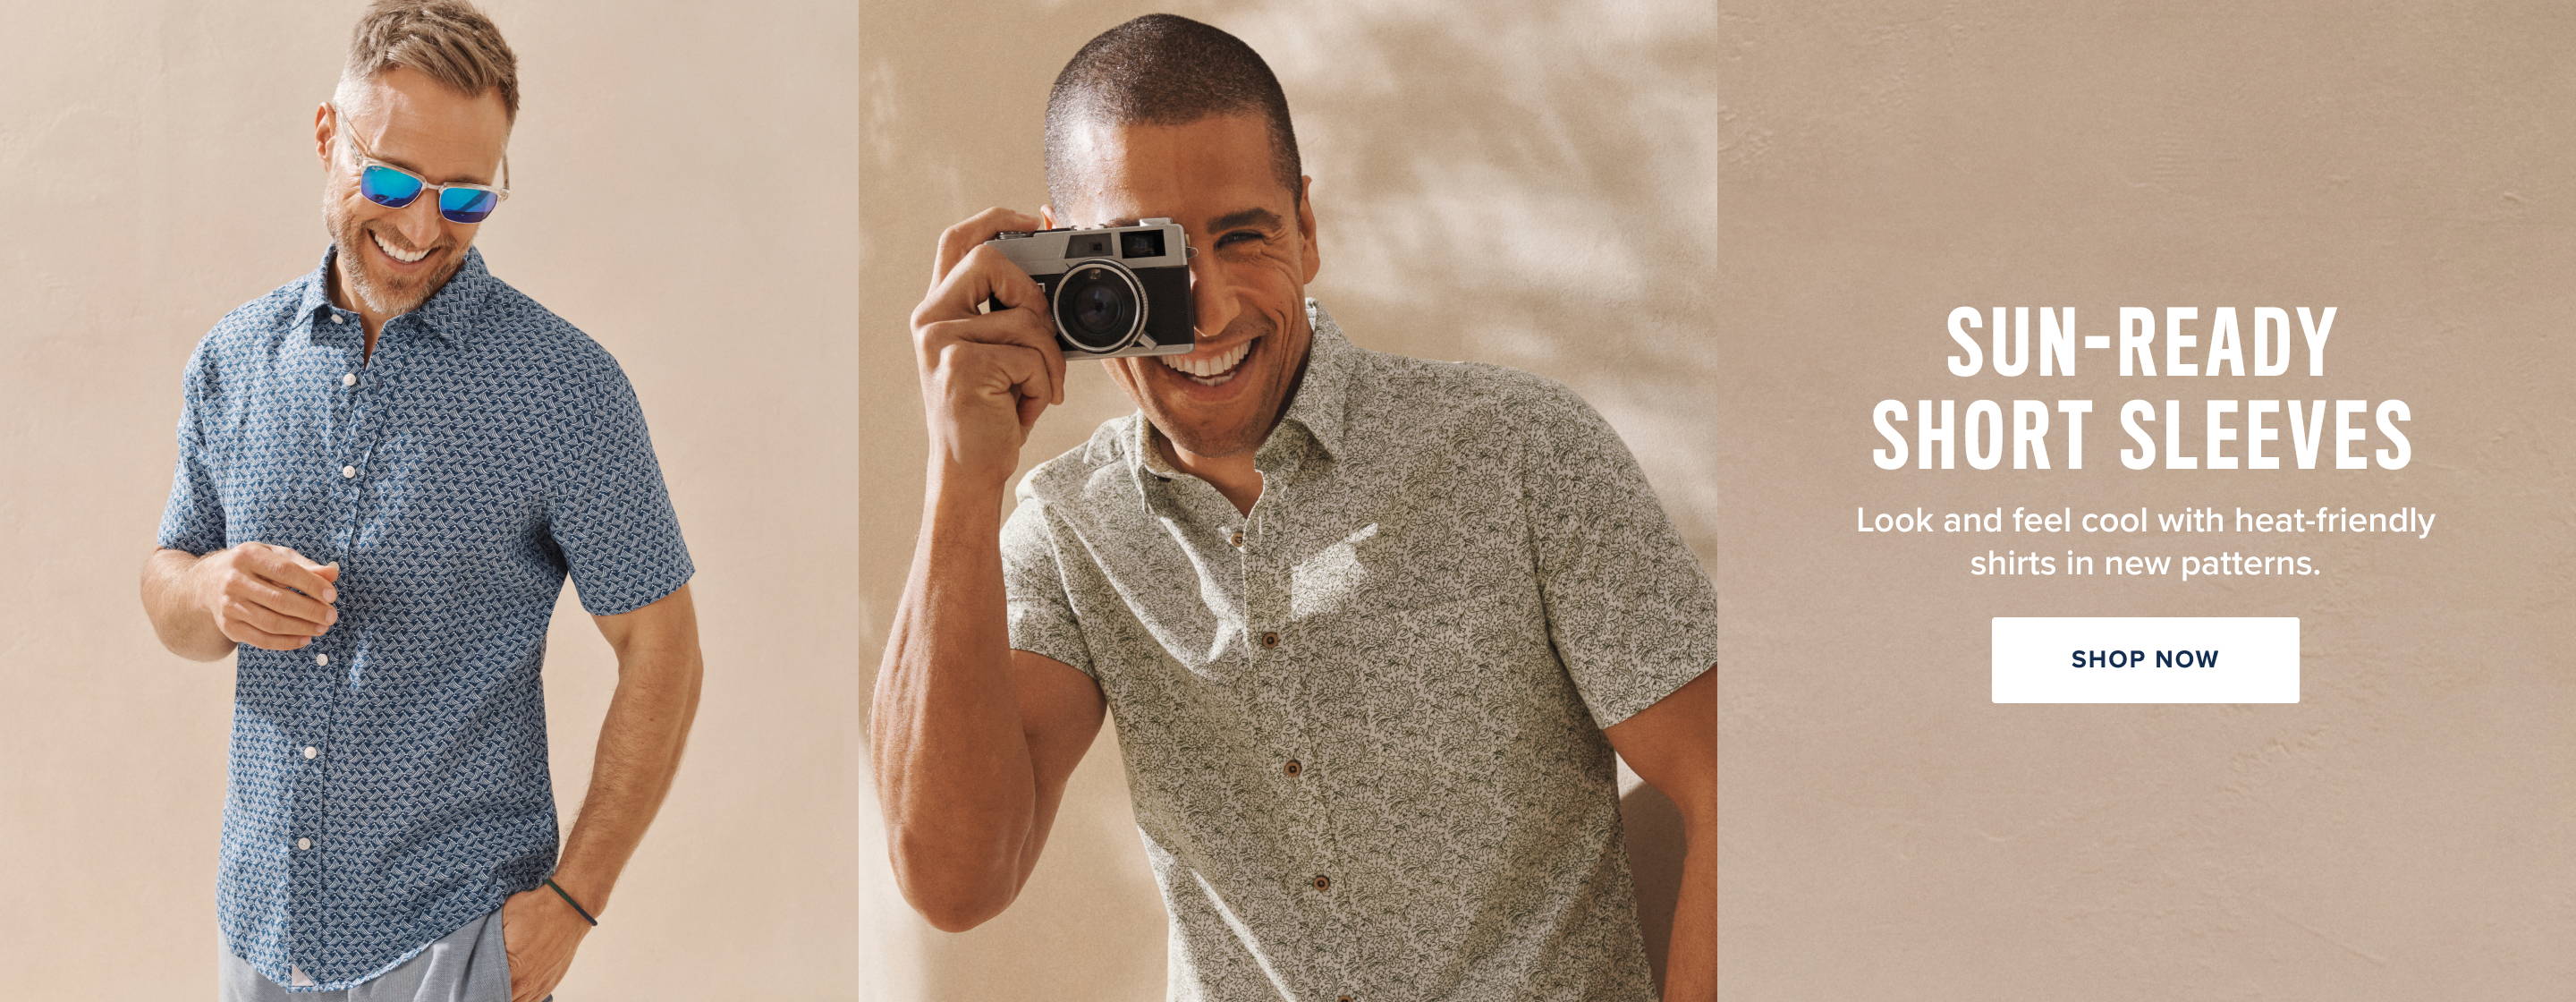 Sun-Ready Short Sleeves Look and feel cool with heat-friendly shirts in new patterns. Shop Now.